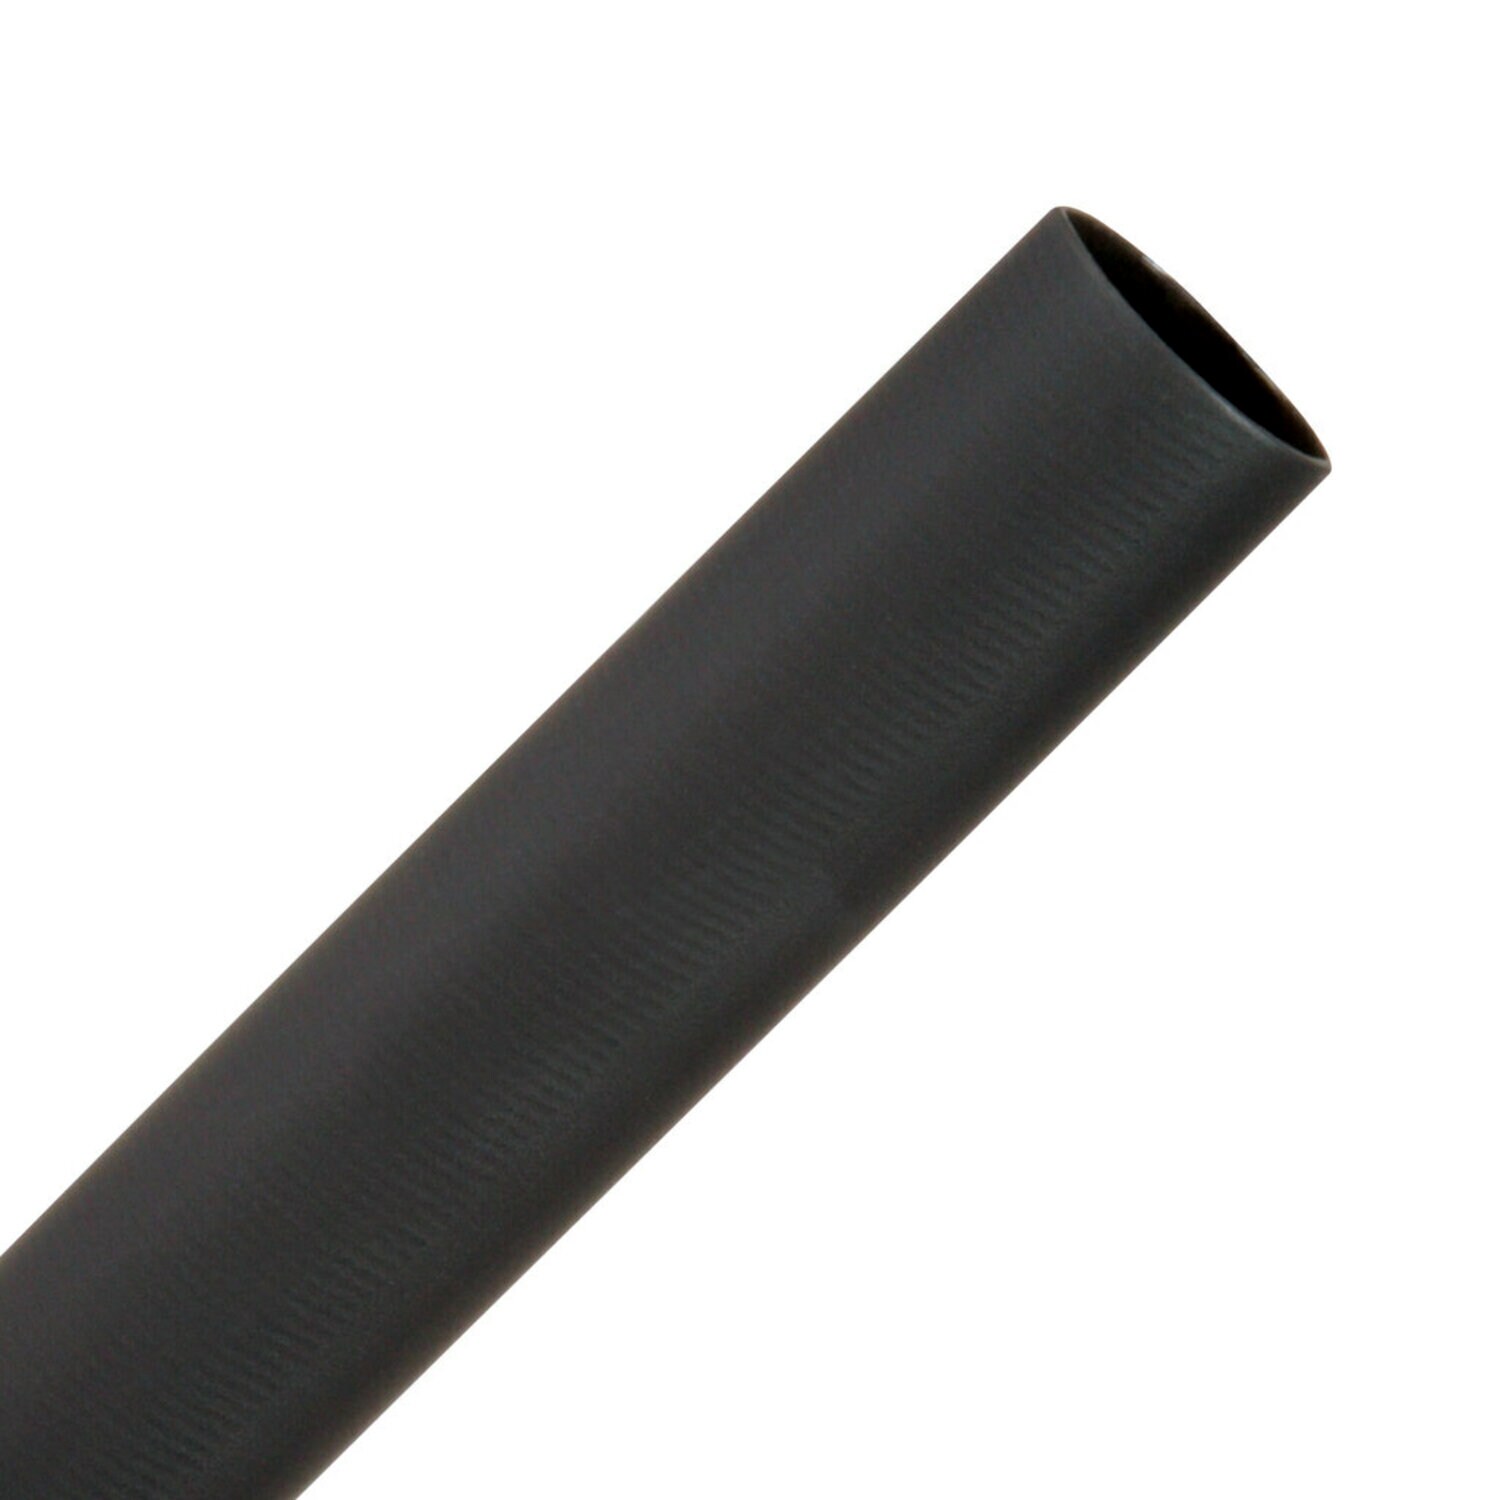 7000133616 - 3M Thin-Wall Heat Shrink Tubing EPS-300, Adhesive-Lined, 1/2-Black-48",
75/Case